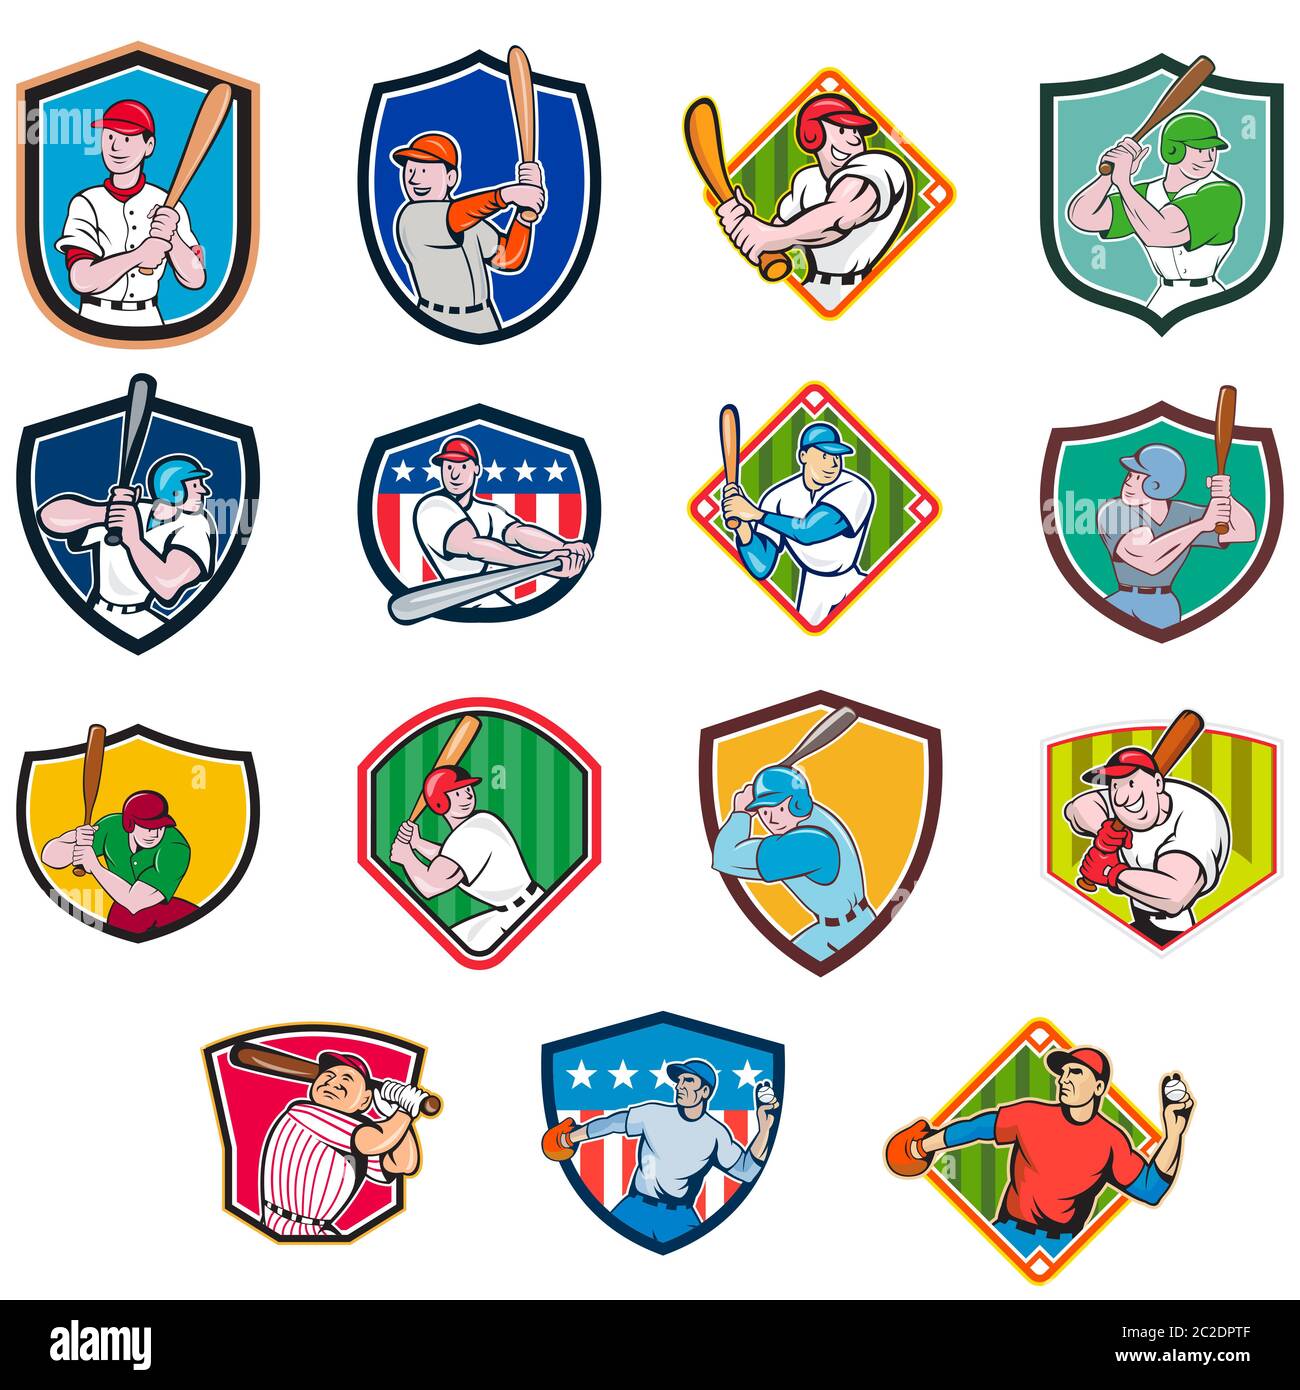 Collection of cartoon icon illustration of American baseball player, pitcher or batter, batting, pitching or throwing ball set inside shield isolated Stock Photo